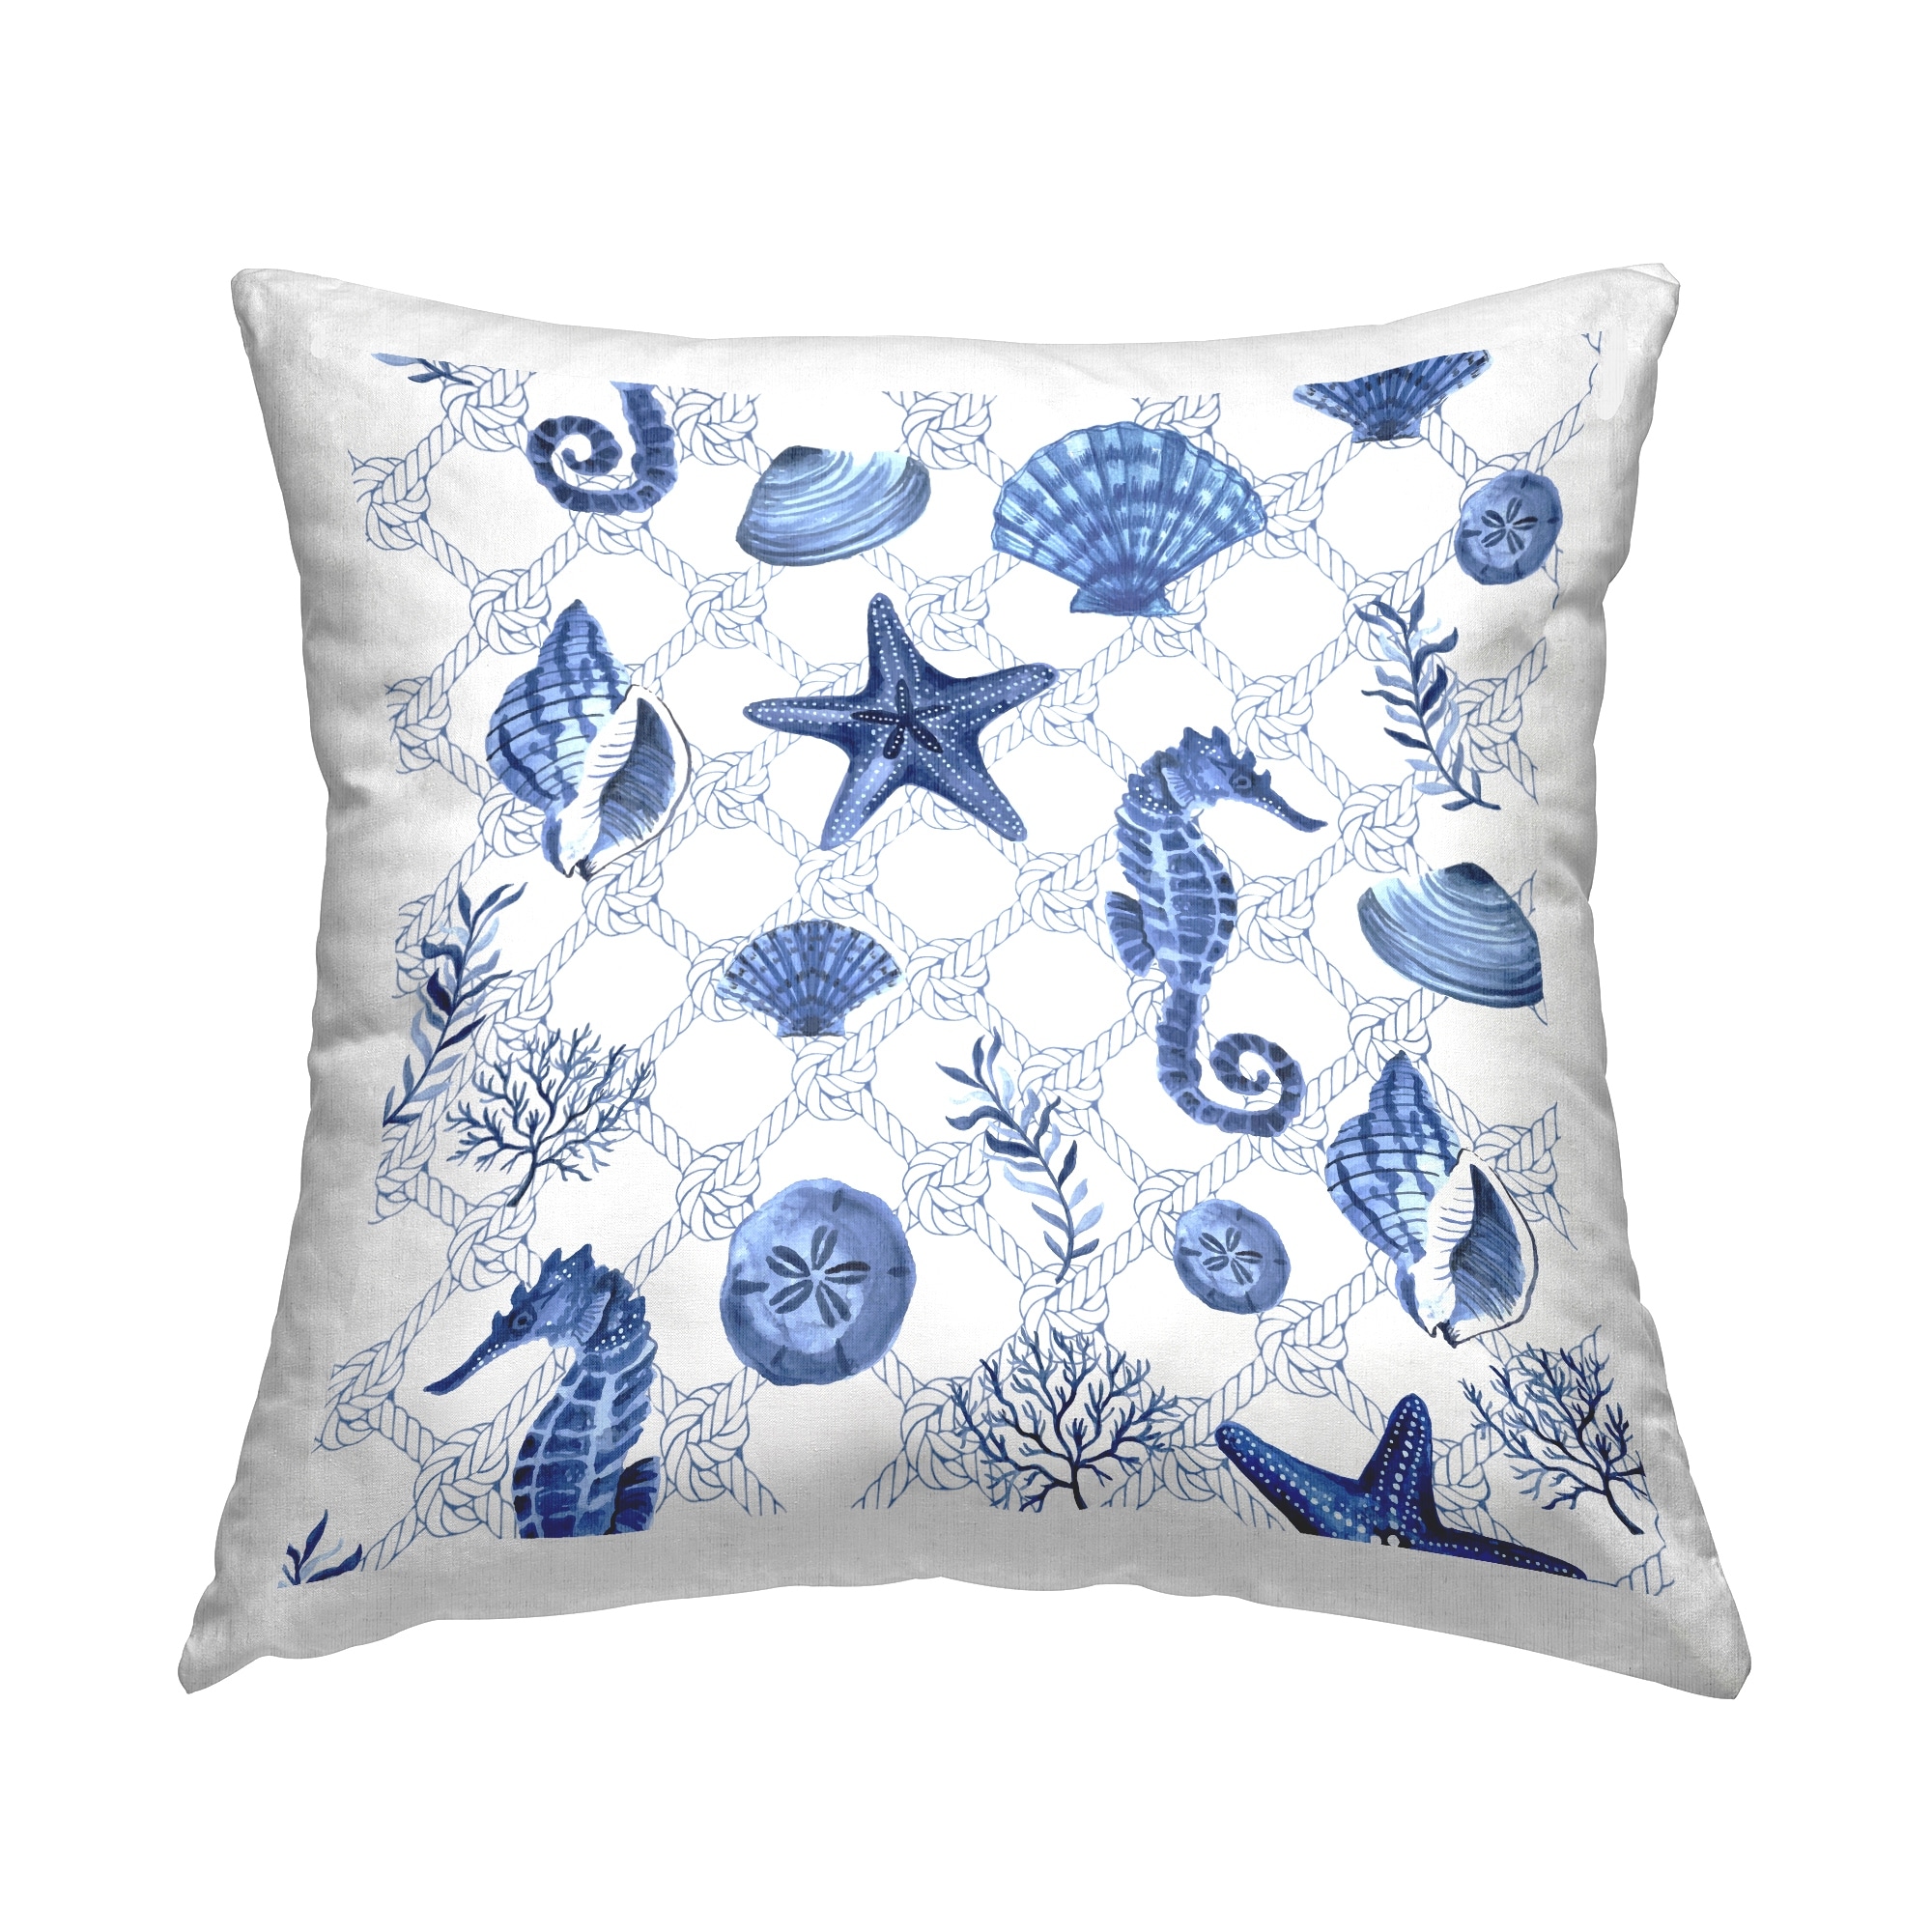 Stupell Nautical Sea Life Boat Rope Pattern Printed Throw Pillow